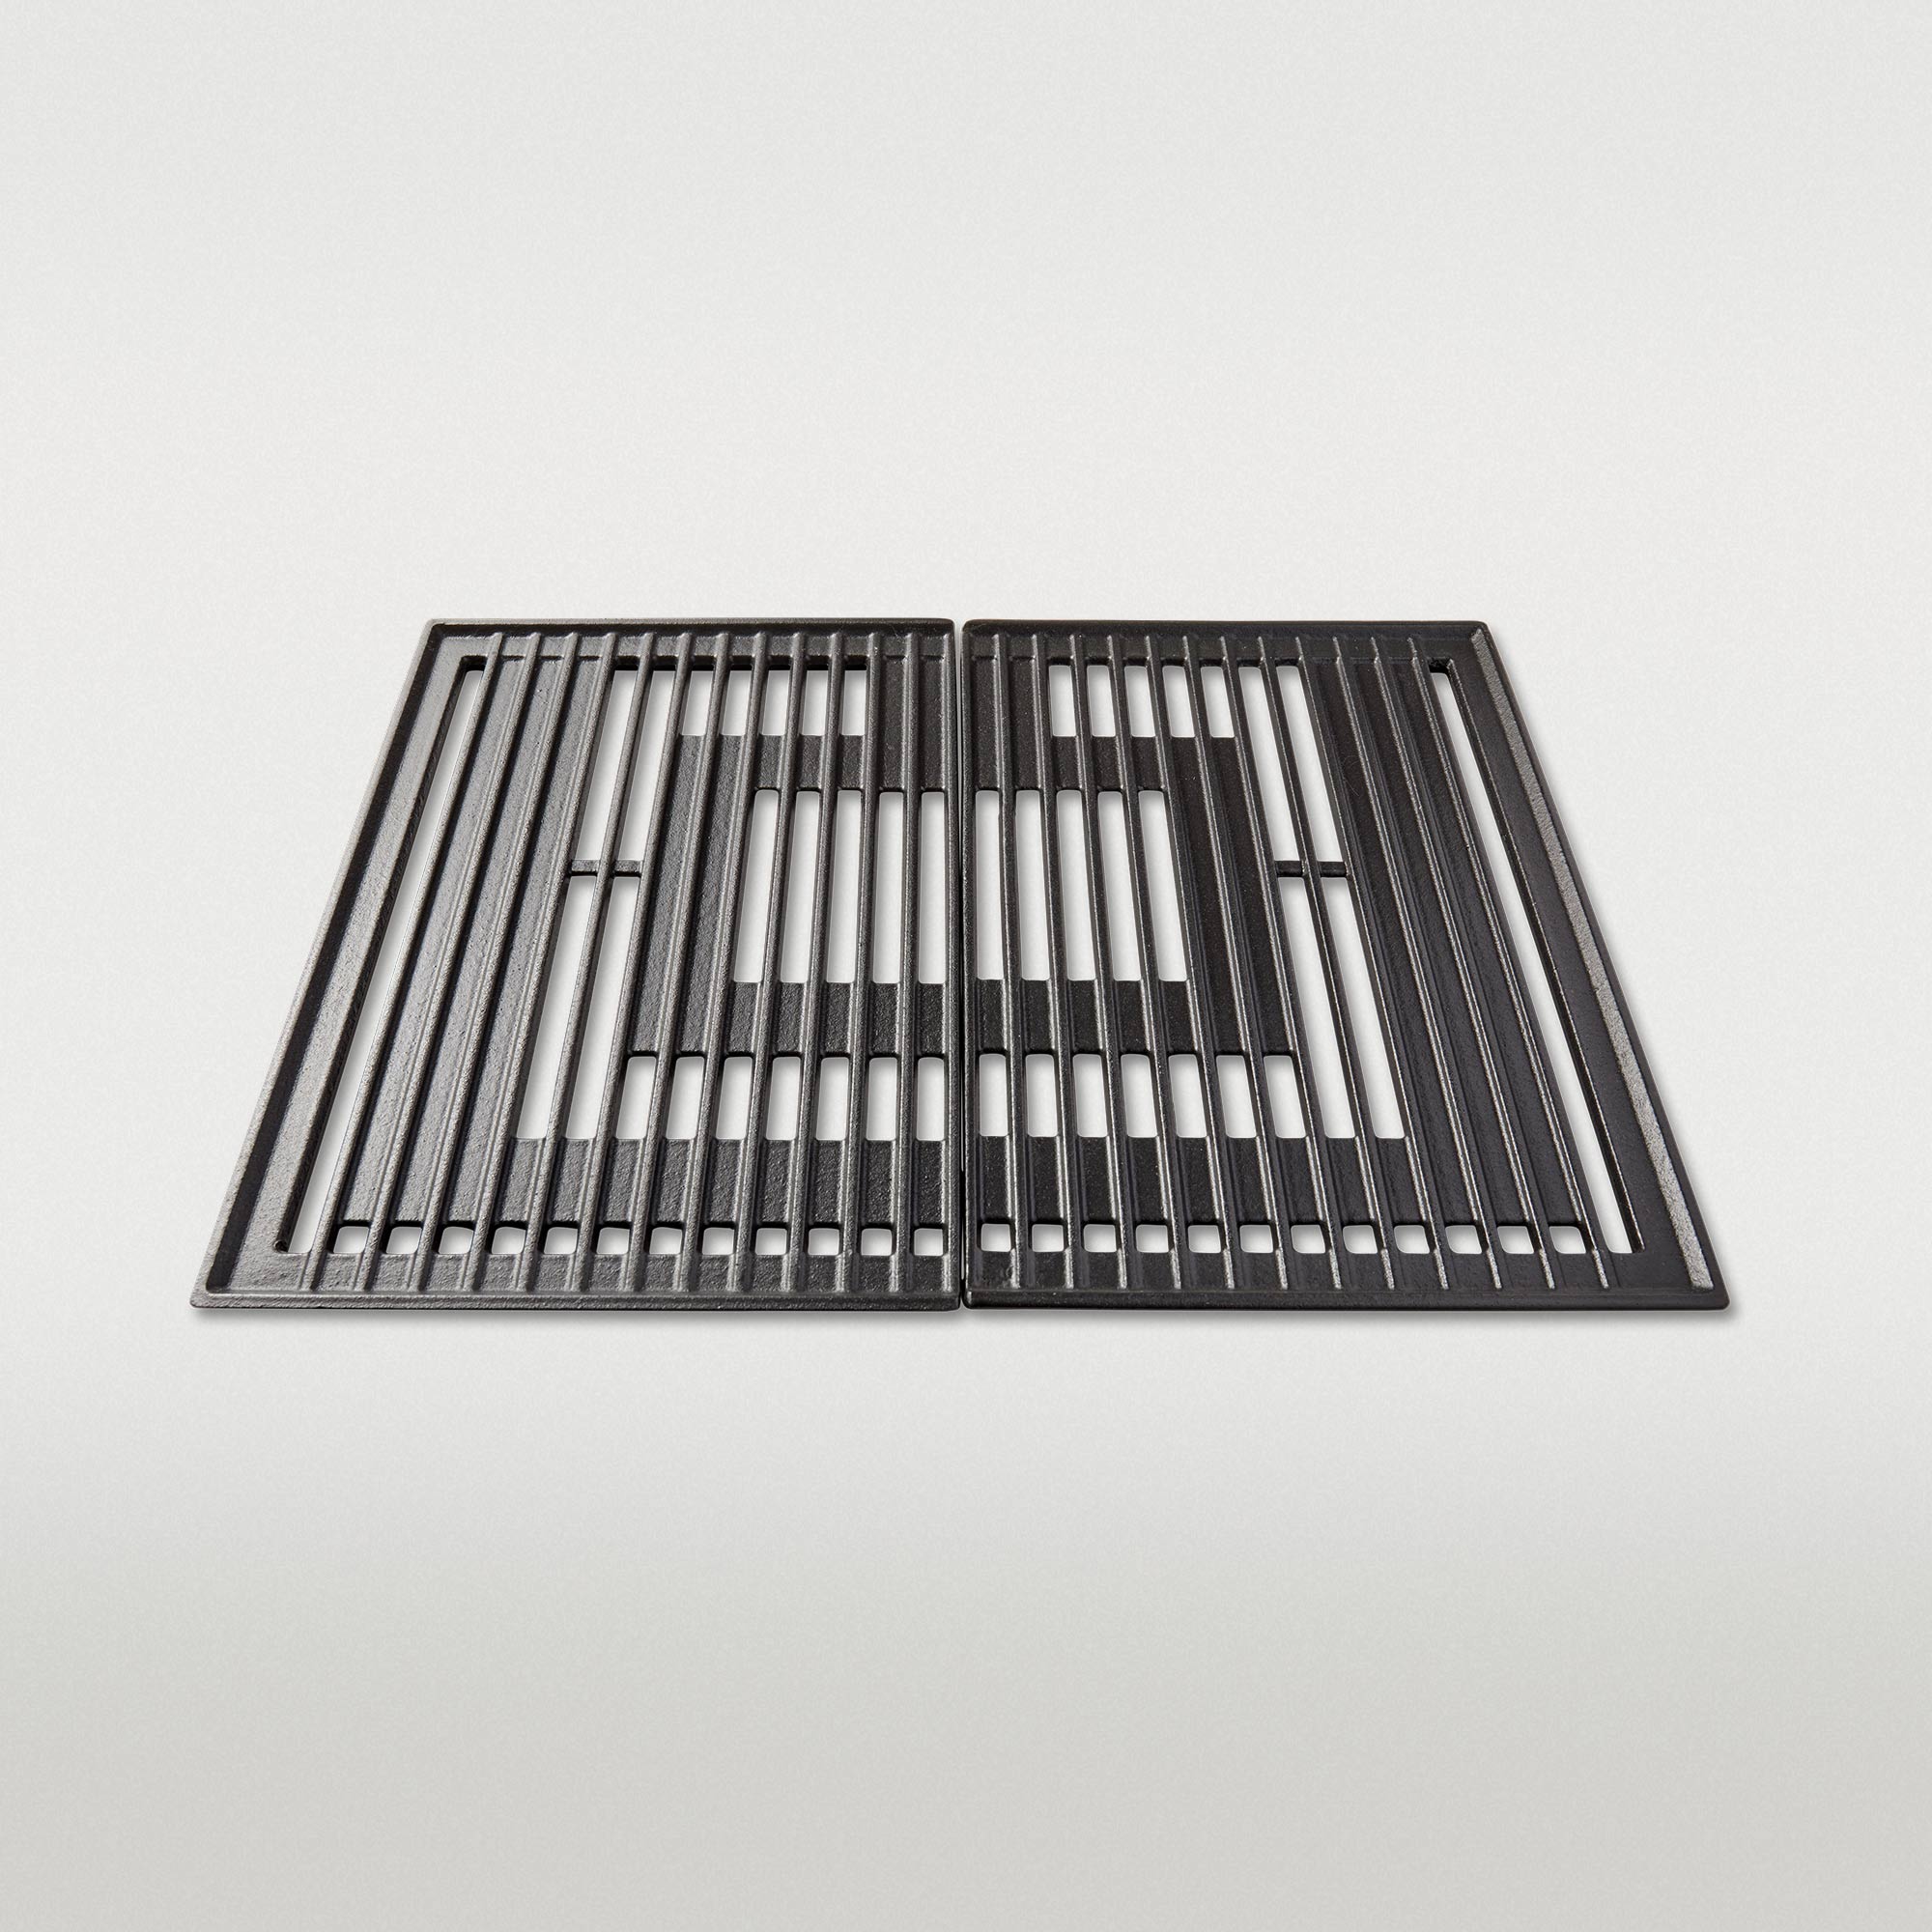 BakerStone Original Series Cast Iron Cooking Grates - image 1 of 1